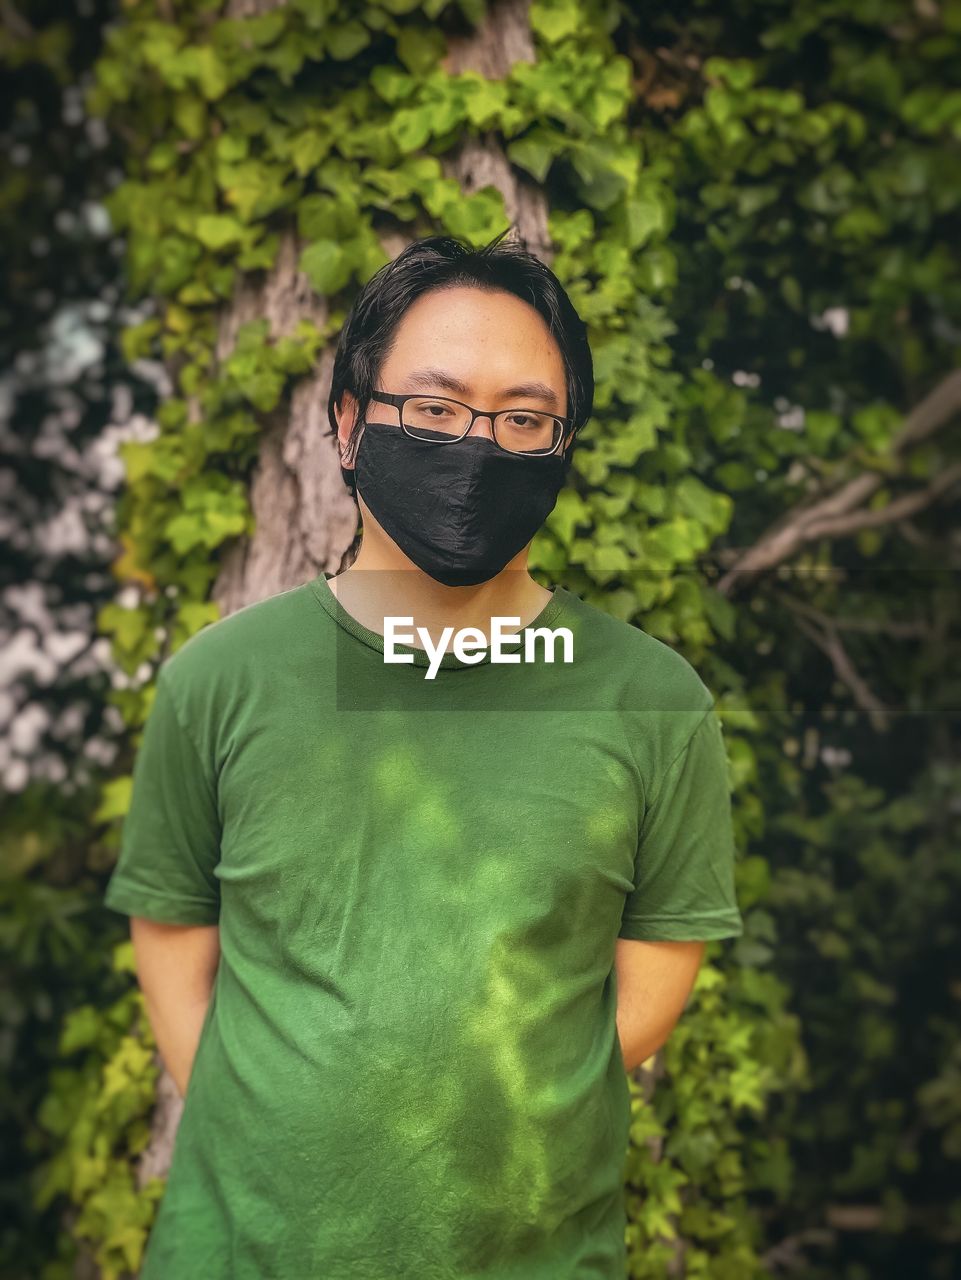 Young man in eyeglasses and mask standing against trees and plants.